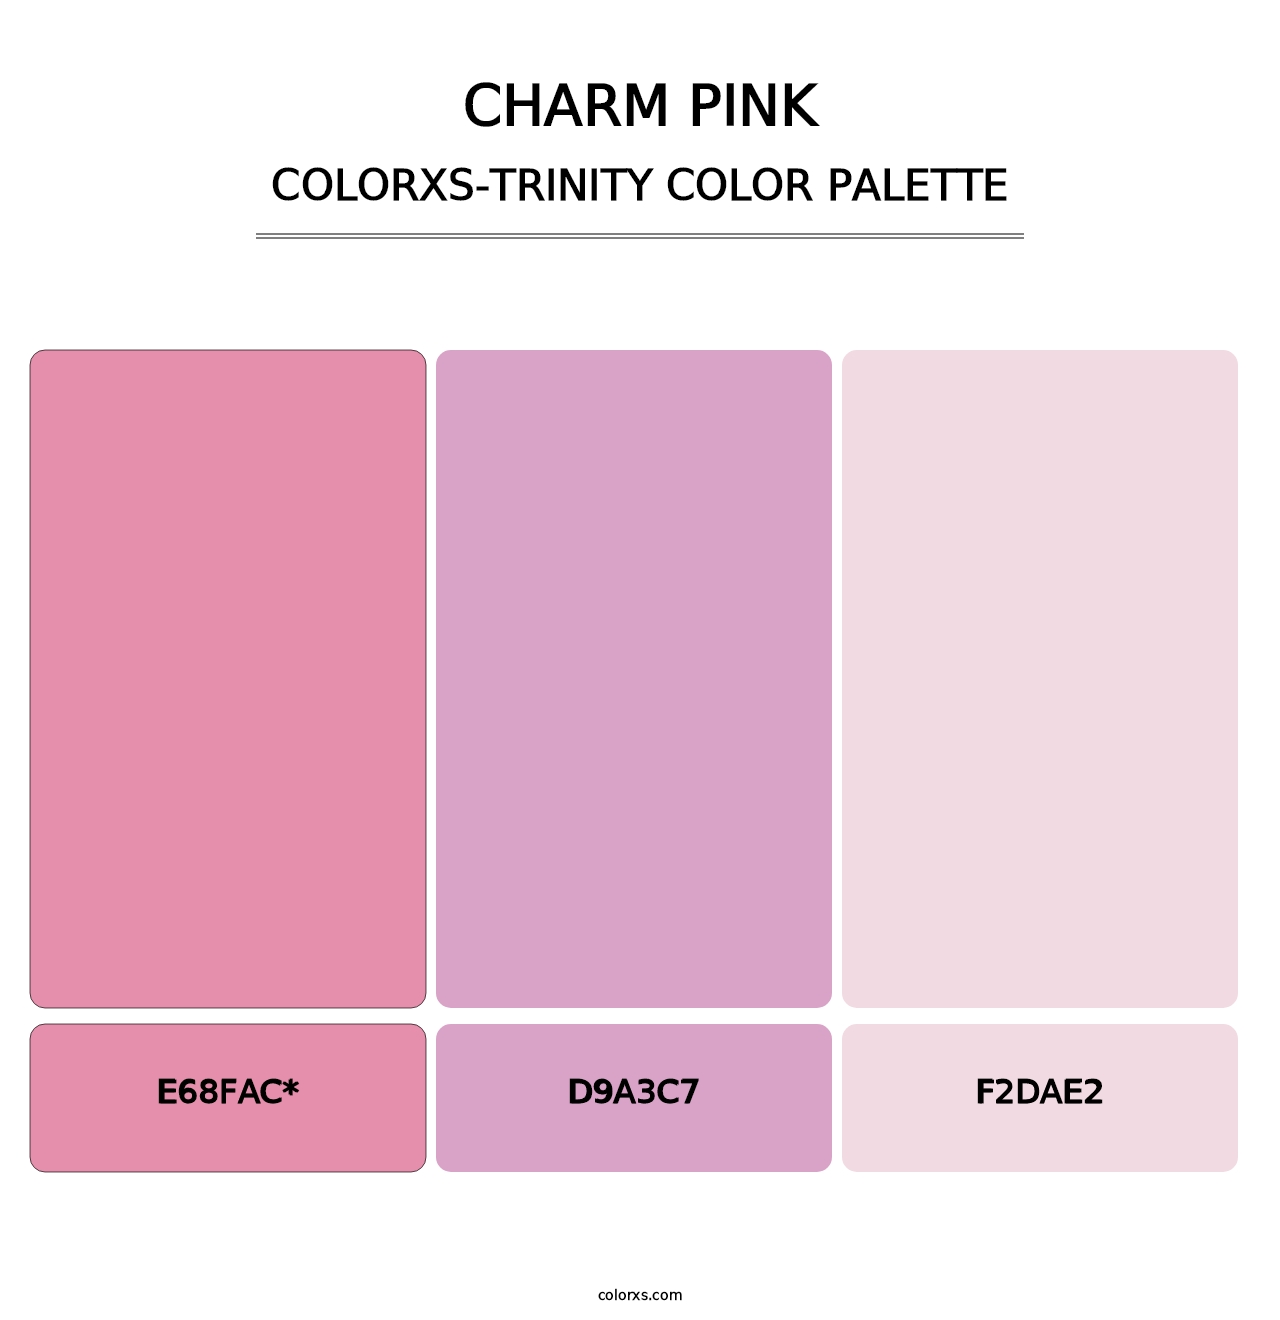 Charm Pink - Colorxs Trinity Palette